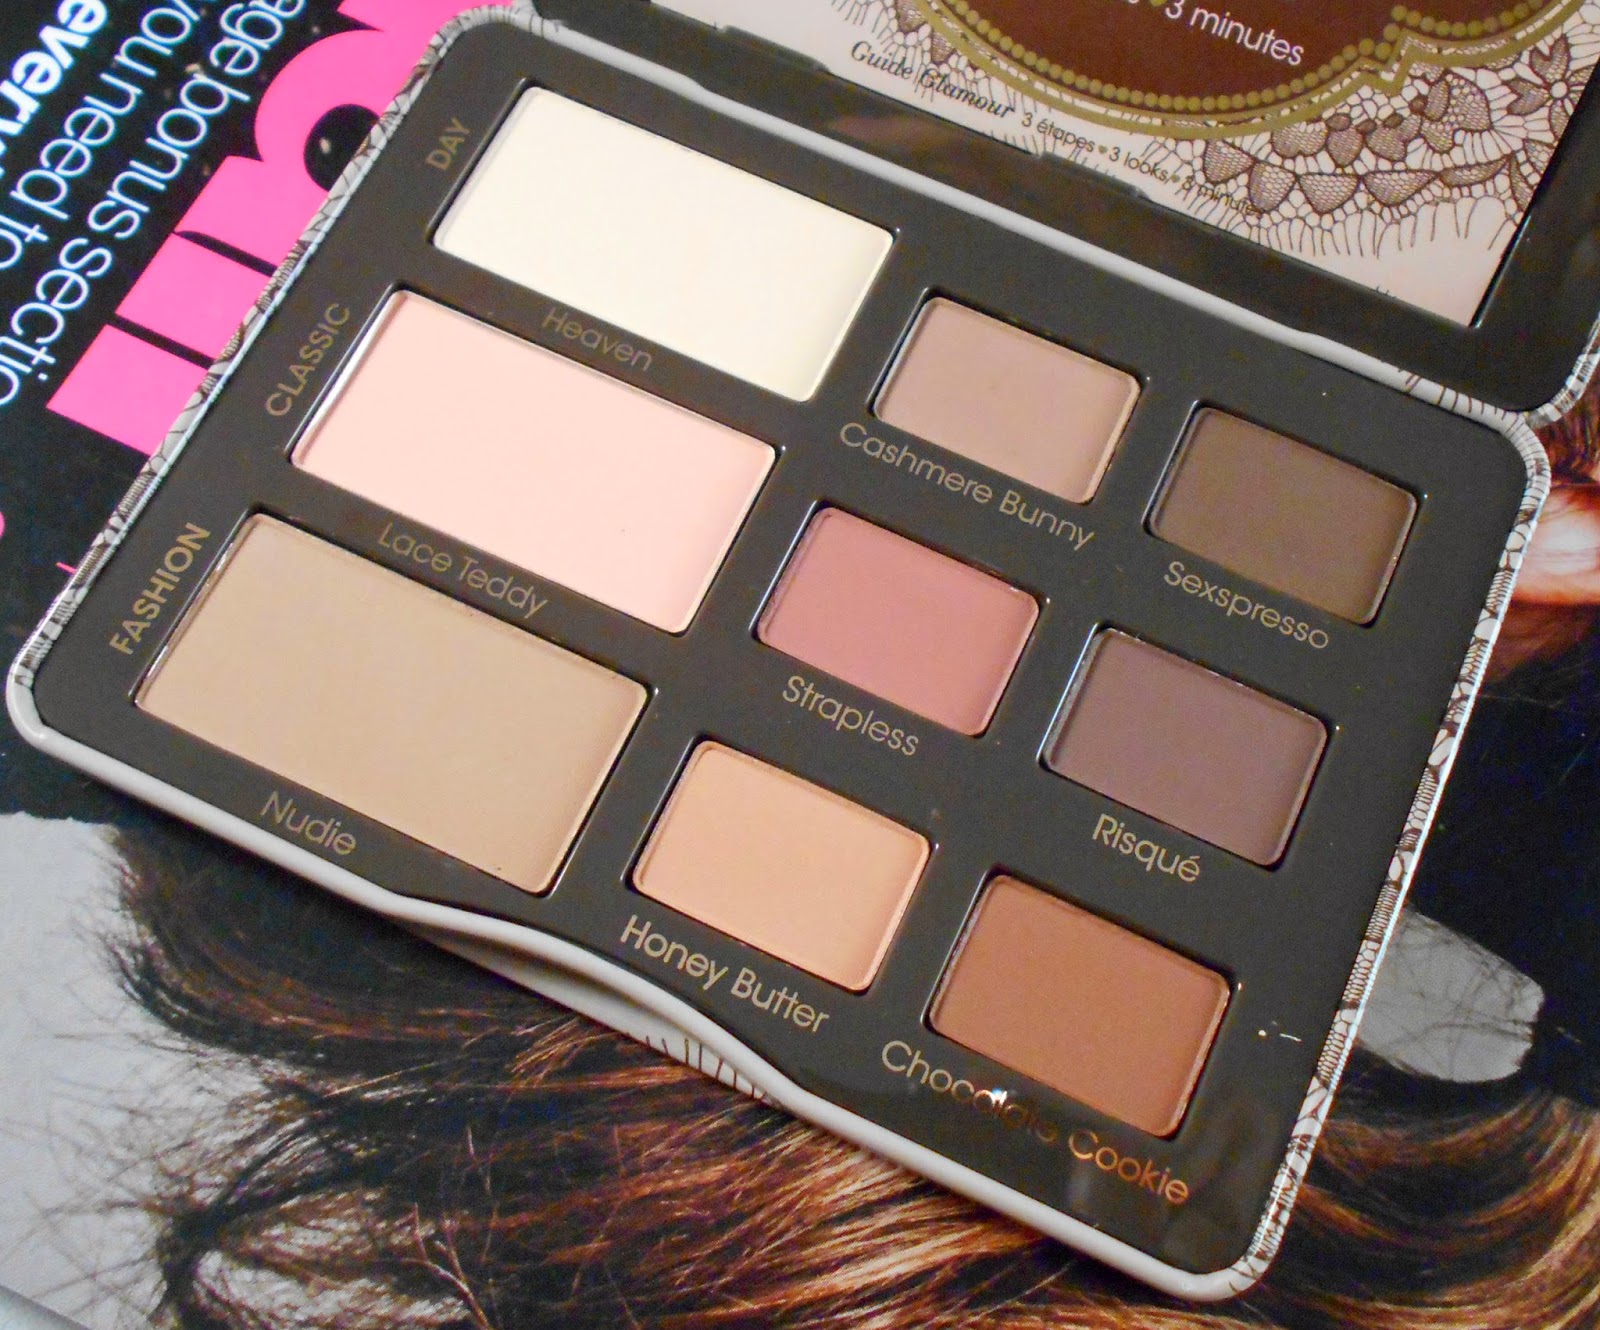 Makeup, Fashion & Royalty Review Too Faced Natural Matte